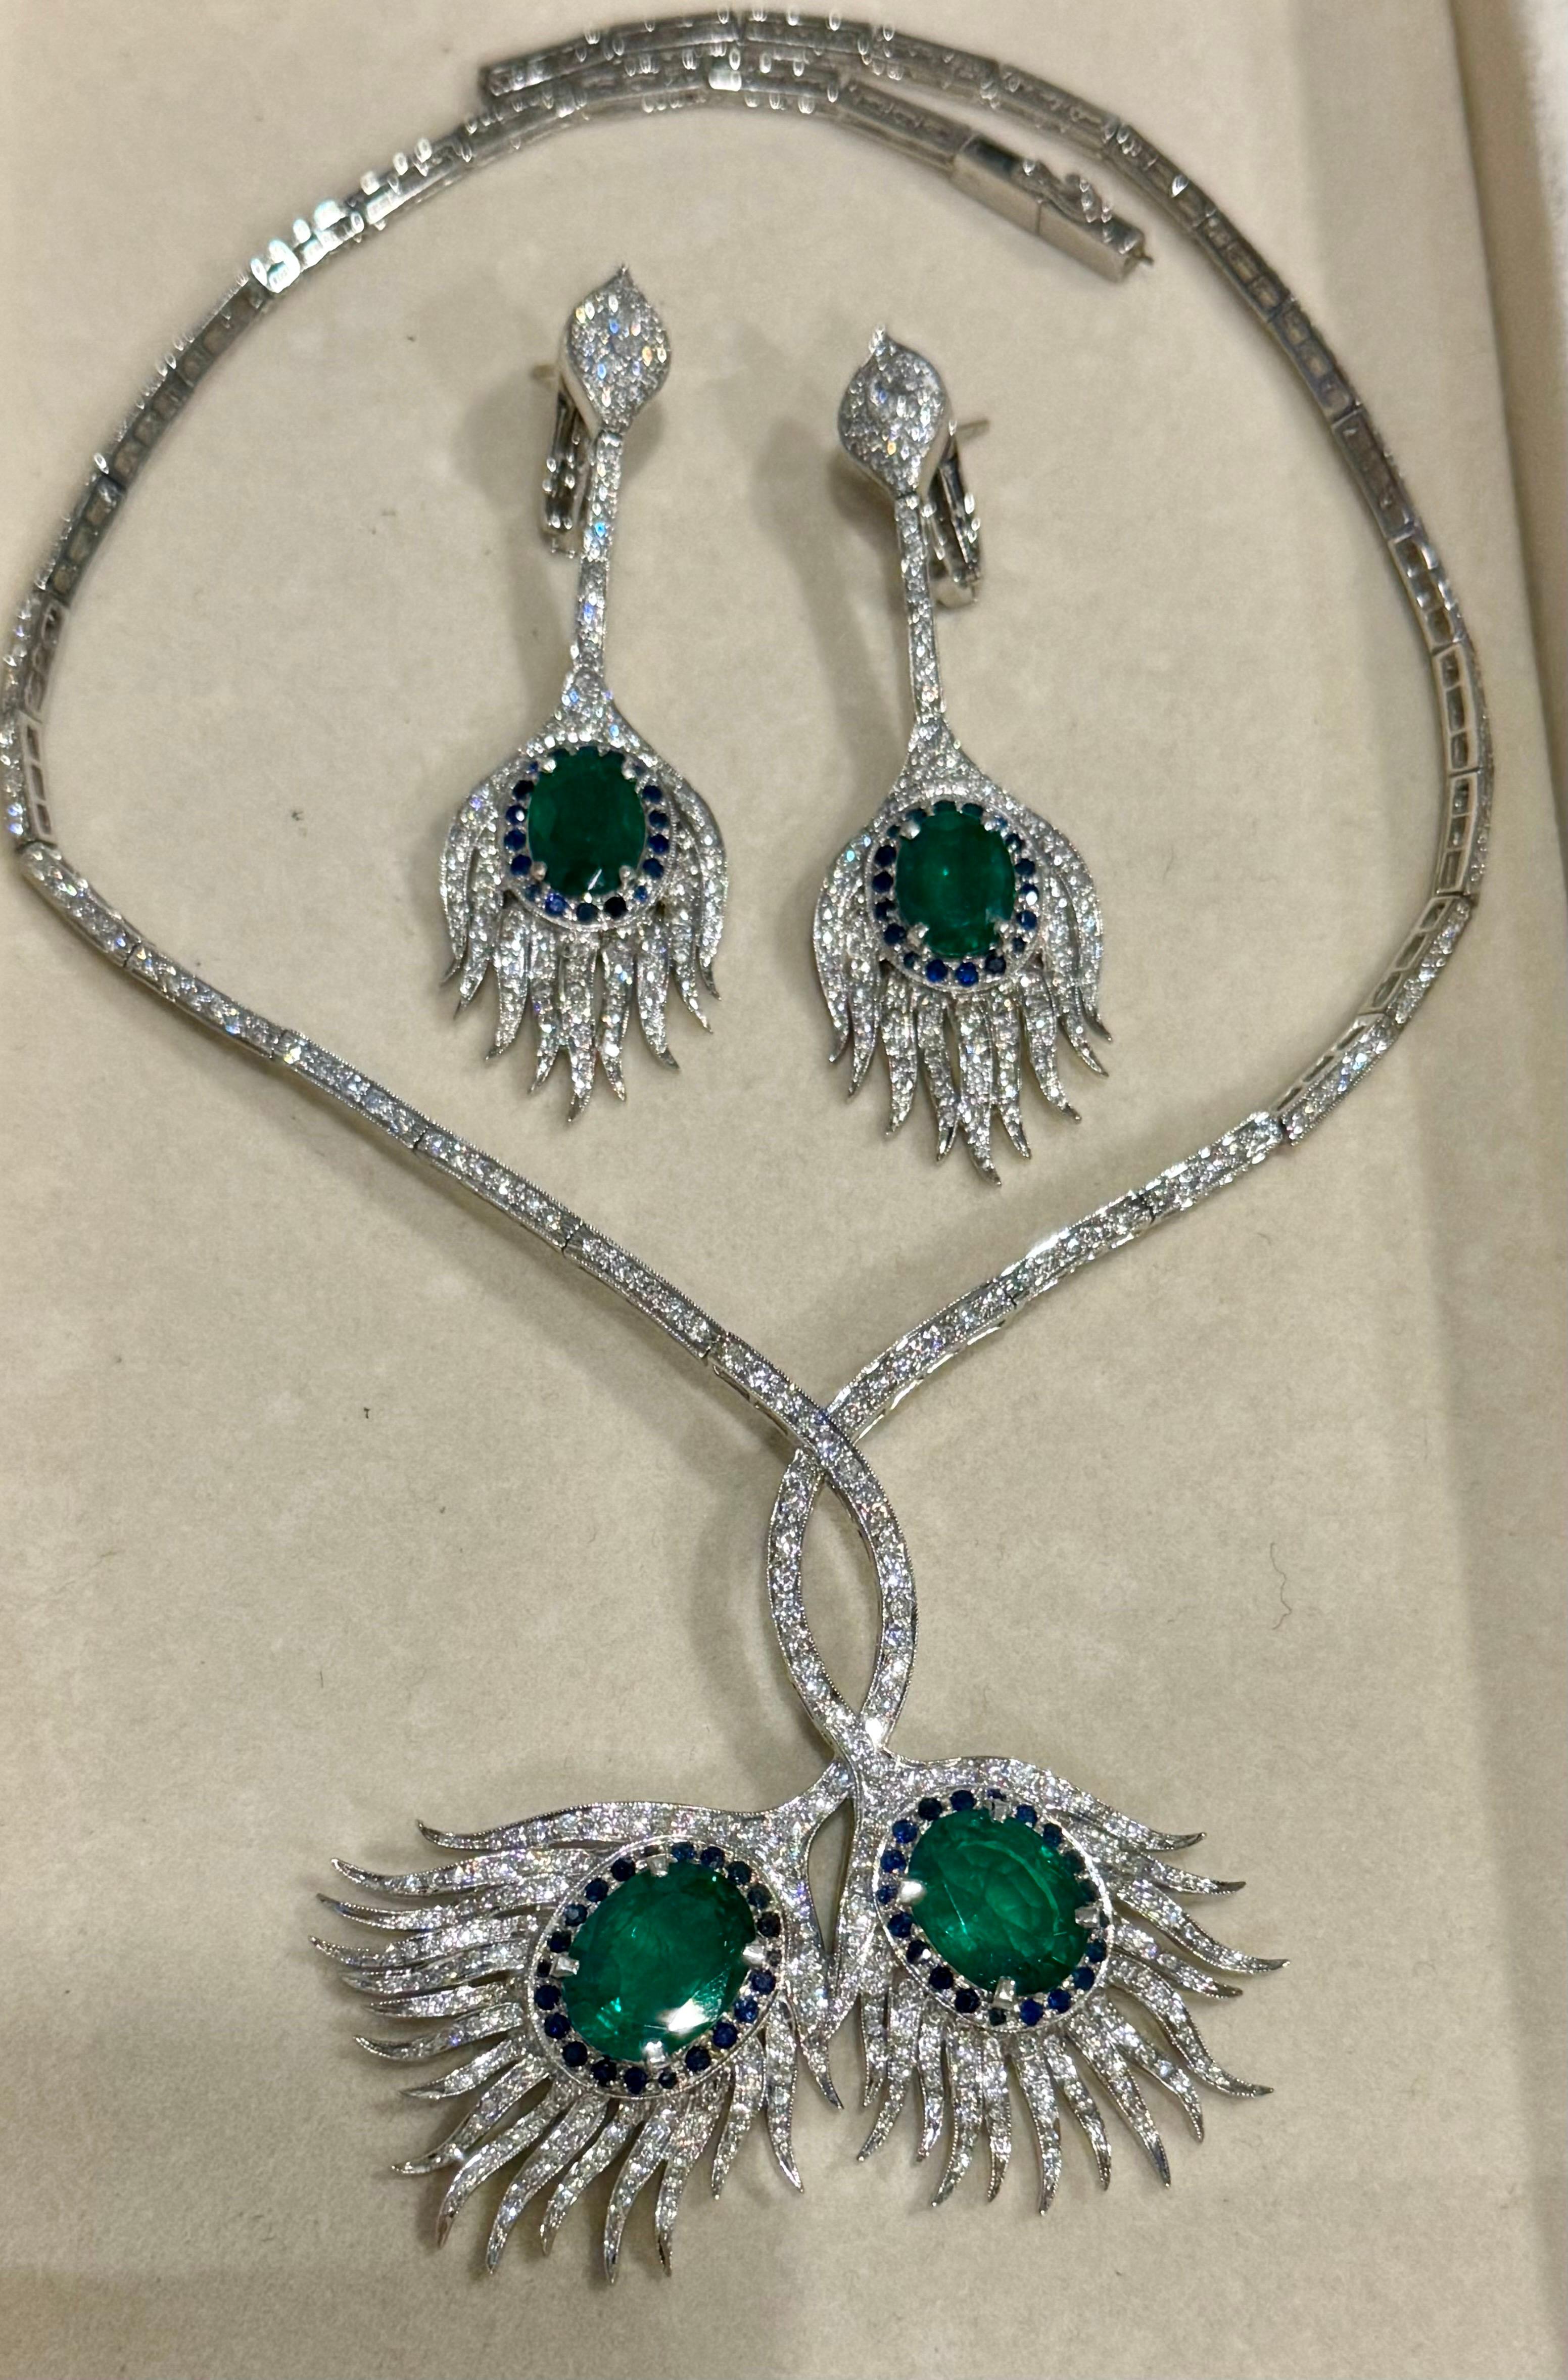 GIA Certified 20ct Zambian Emerald & 15ct Diamond Necklace Earring Suite 18KWG For Sale 4